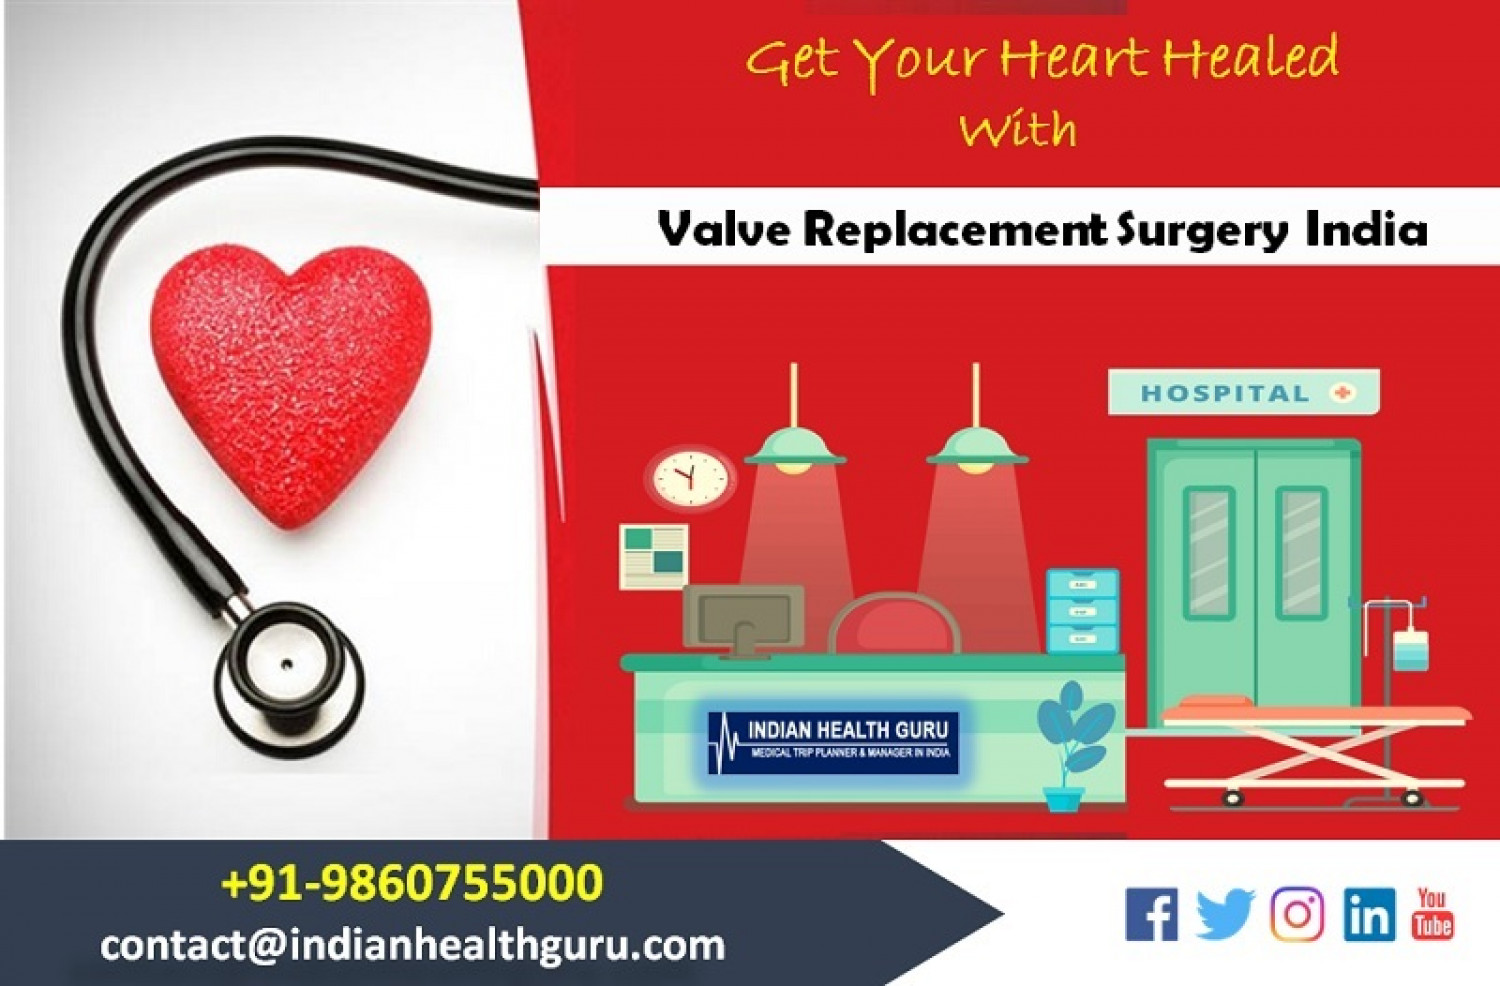 Get Your Heart Healed With Valve Replacement Surgery India Infographic